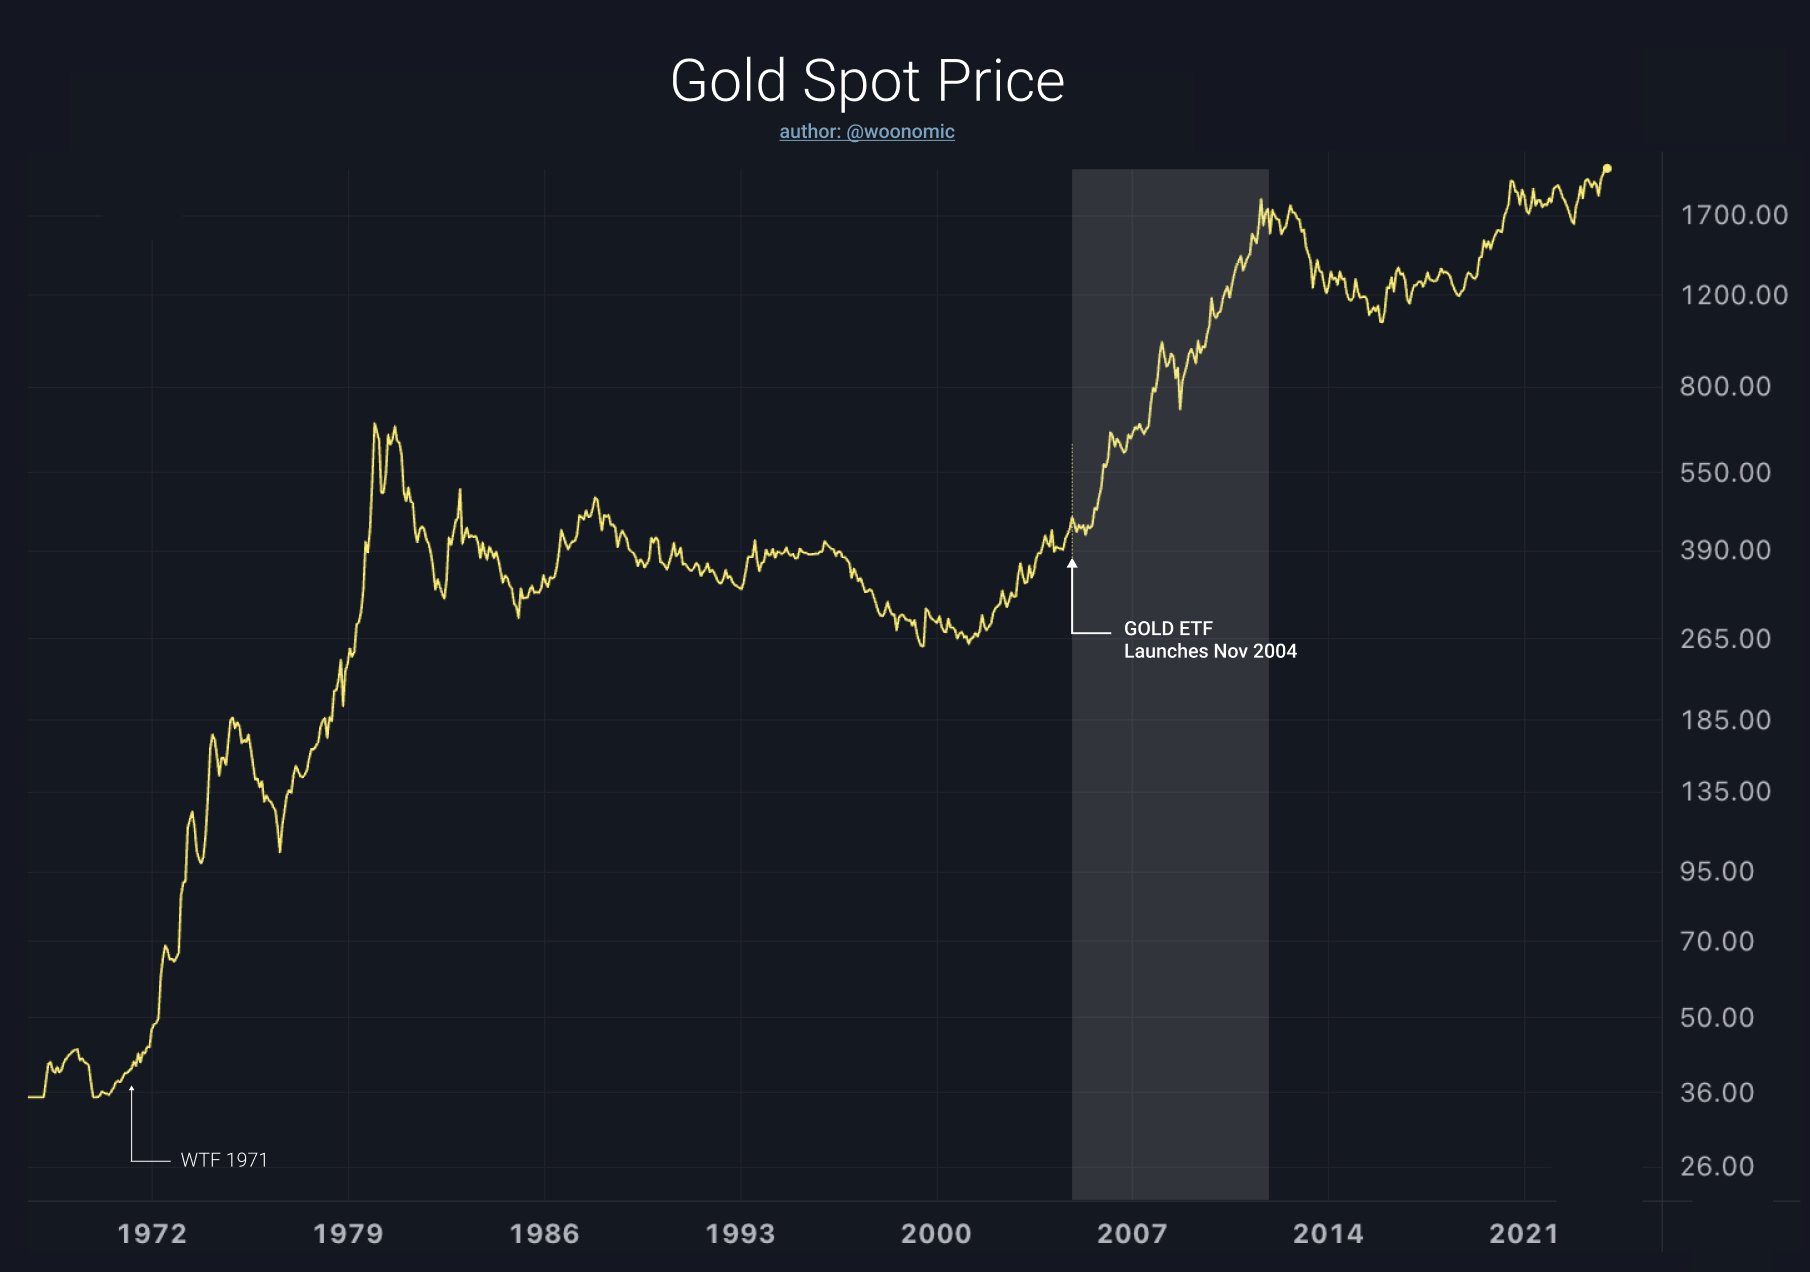 spot price of gold rises after first ETF